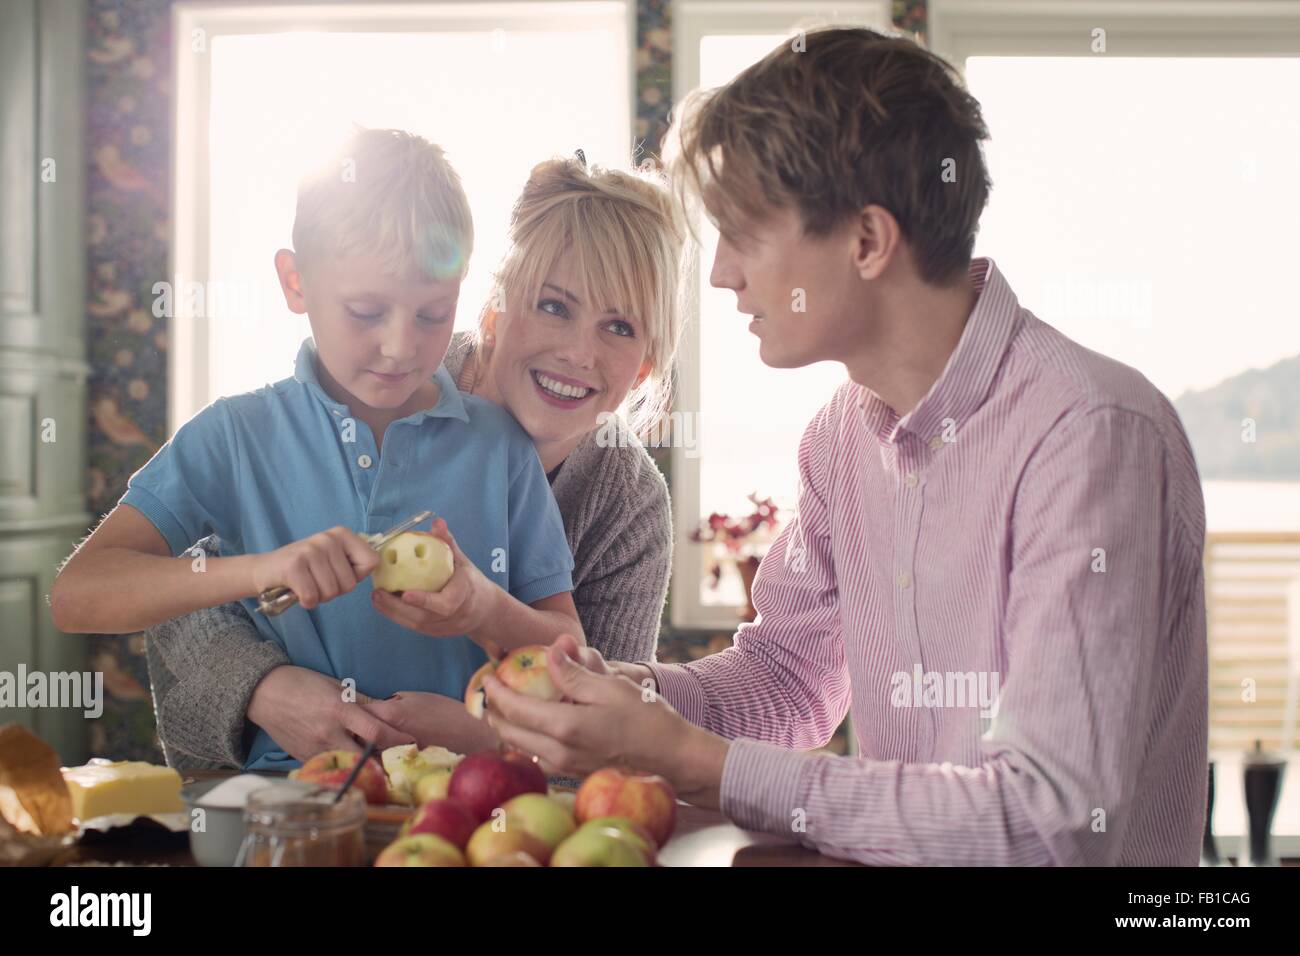 Parents and son peeling organic apples in kitchen Stock Photo